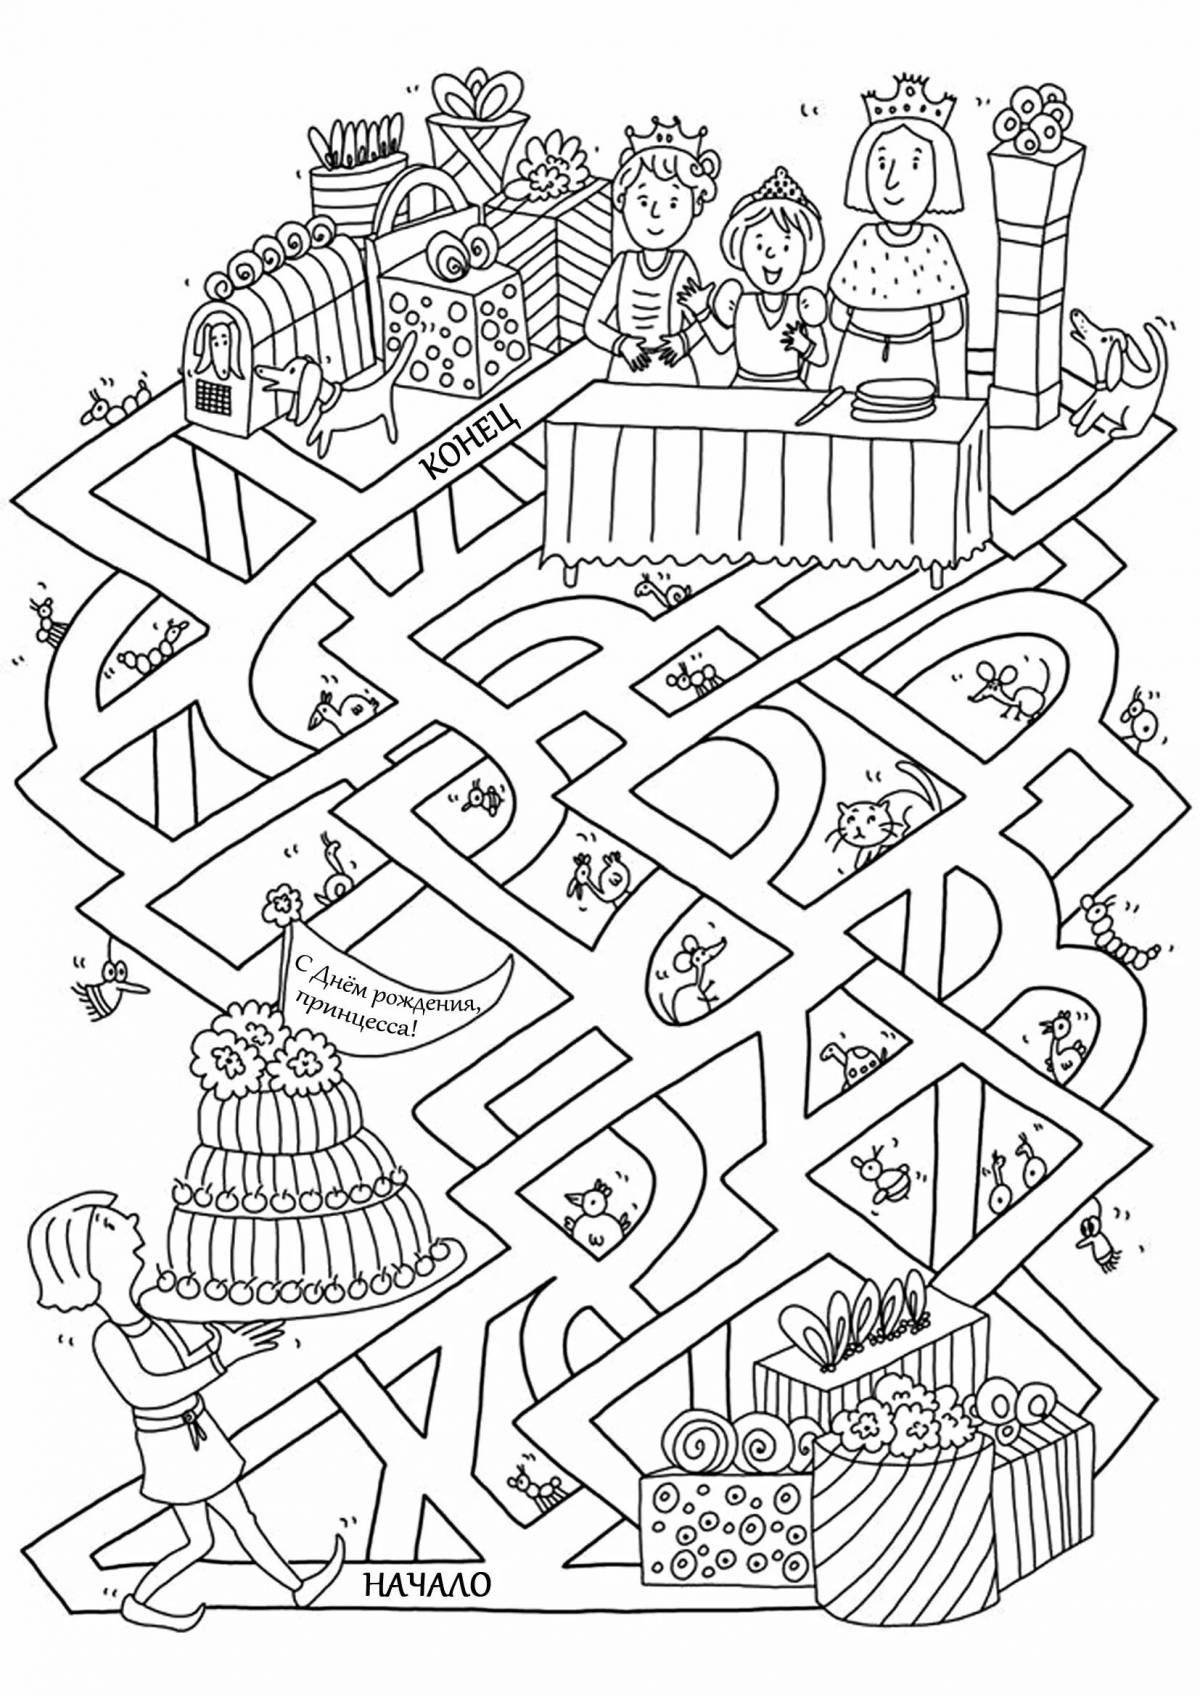 Delightful maze coloring book for 10 year olds